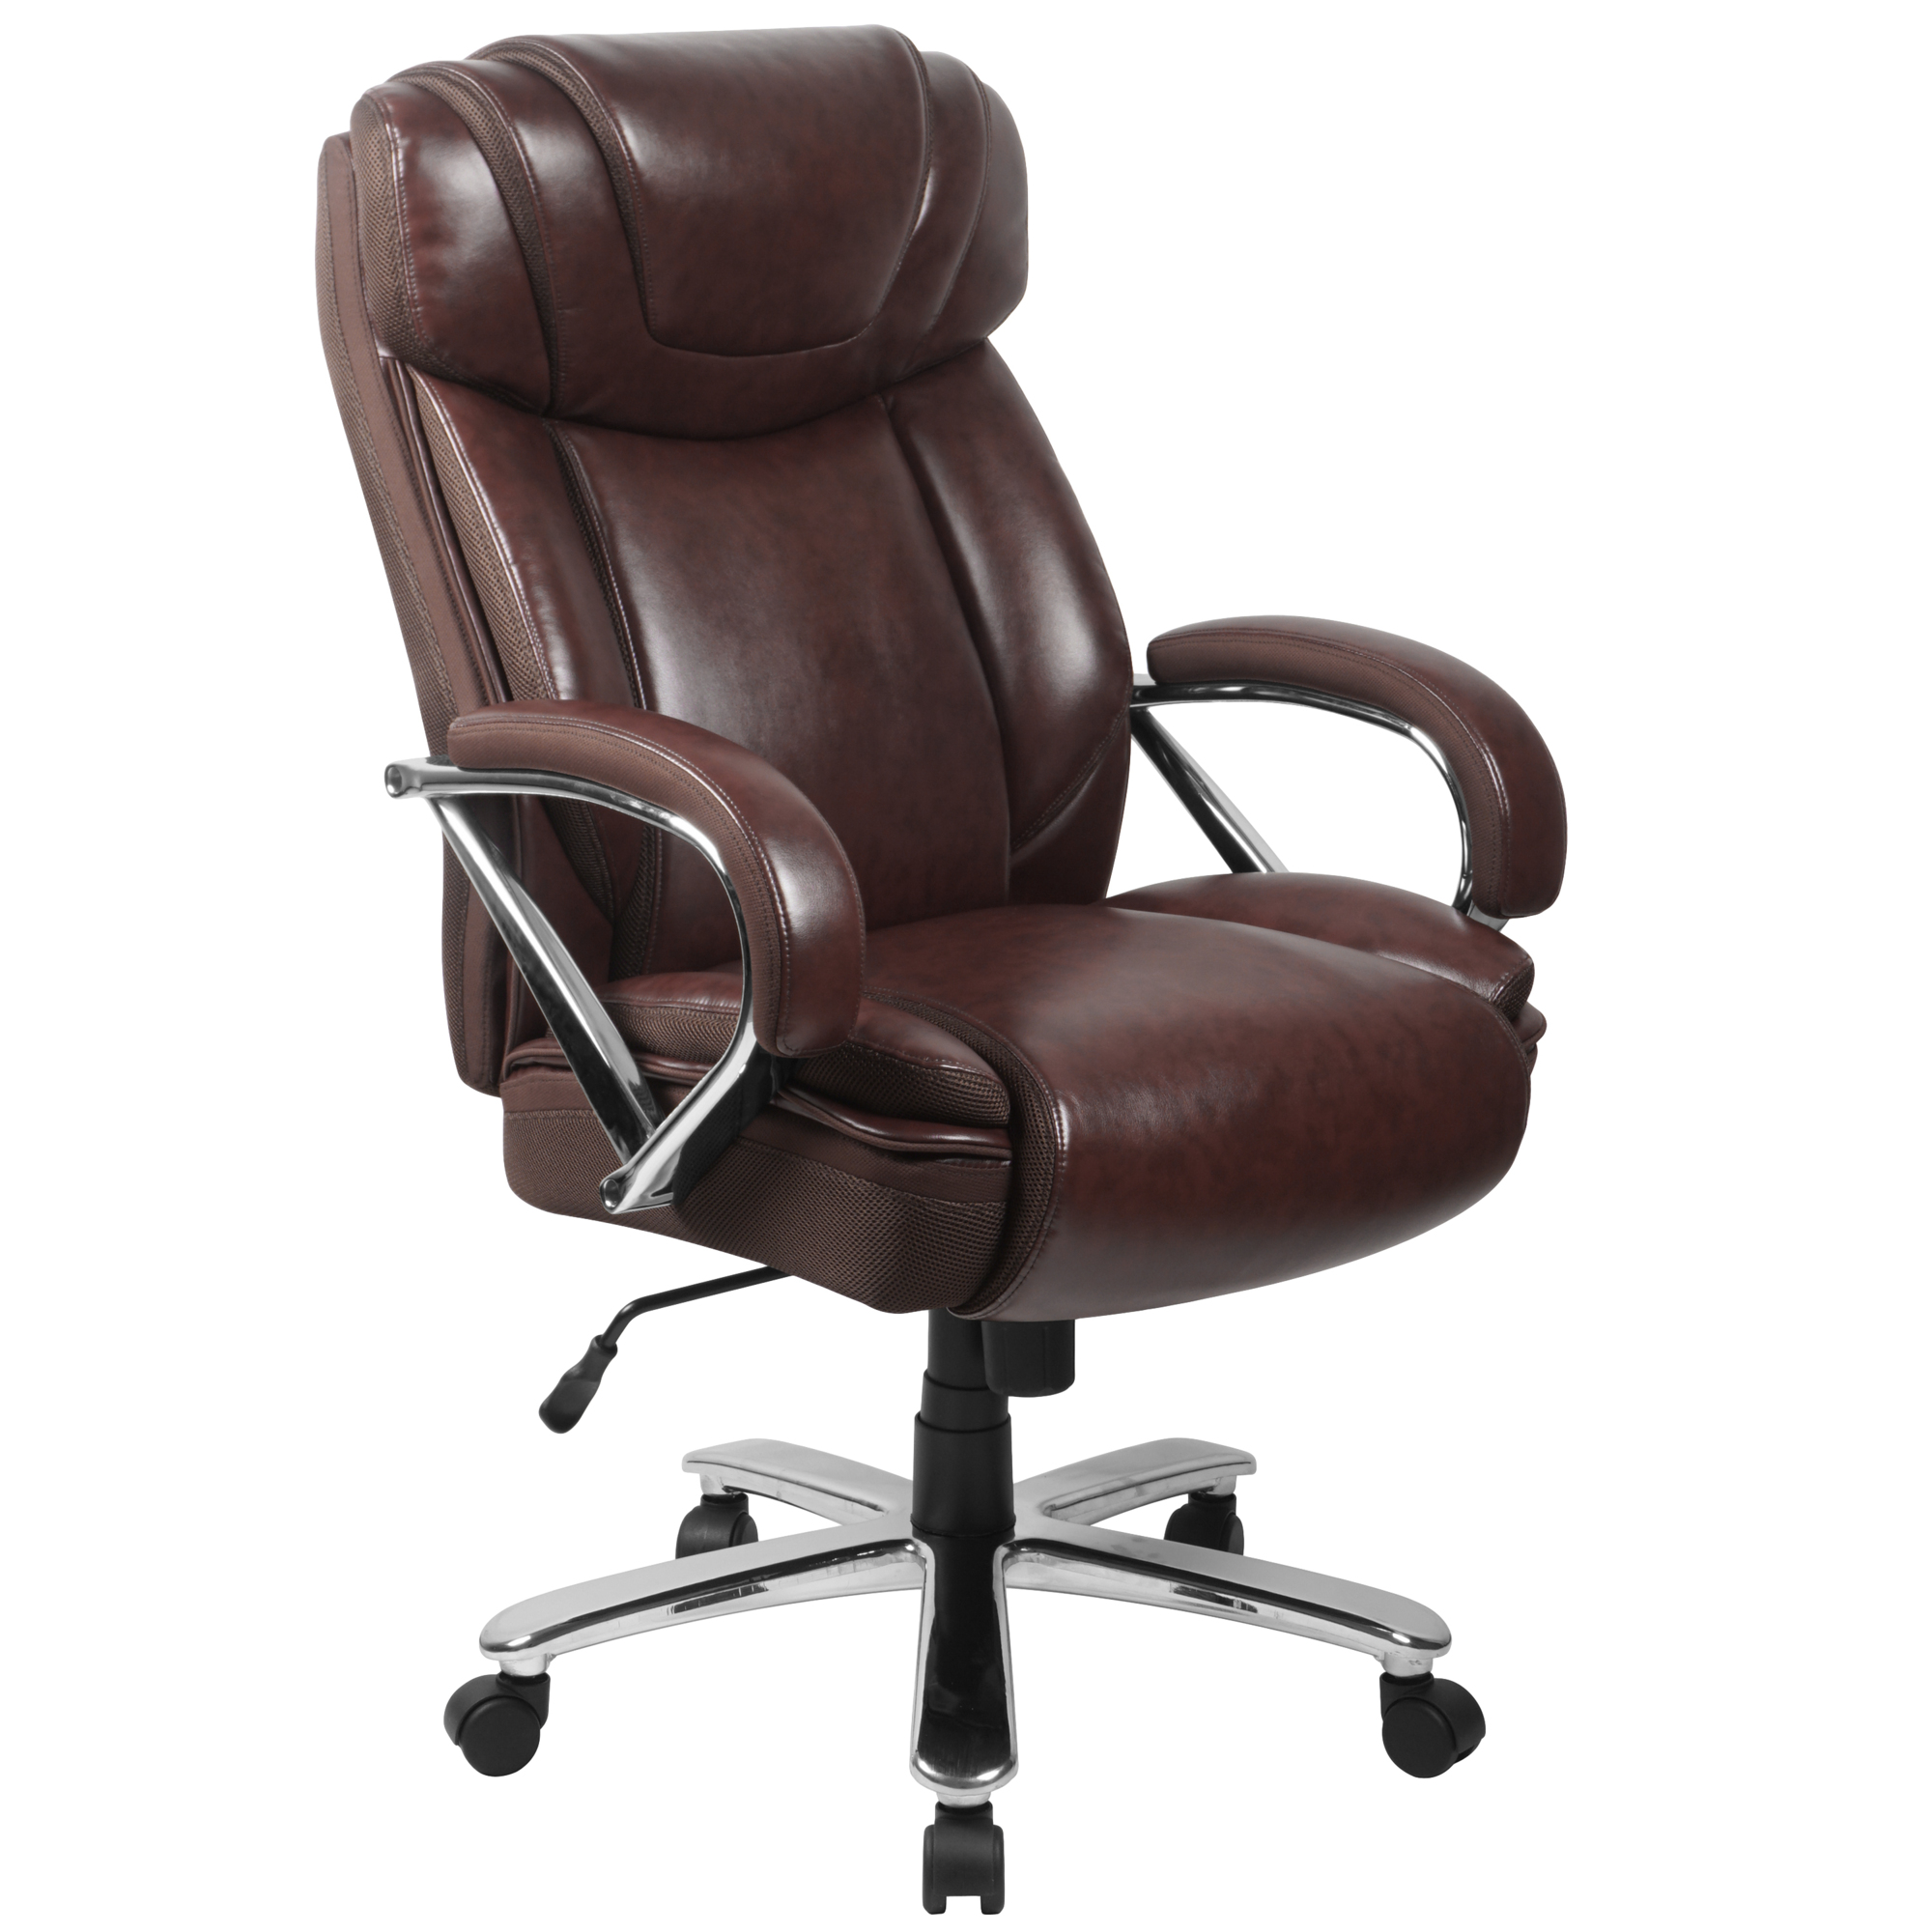 Flash Furniture, 500 lb. Rated Brown LeatherSoft Extra Wide Chair, Primary Color Brown, Included (qty.) 1, Model GO2092M1BN